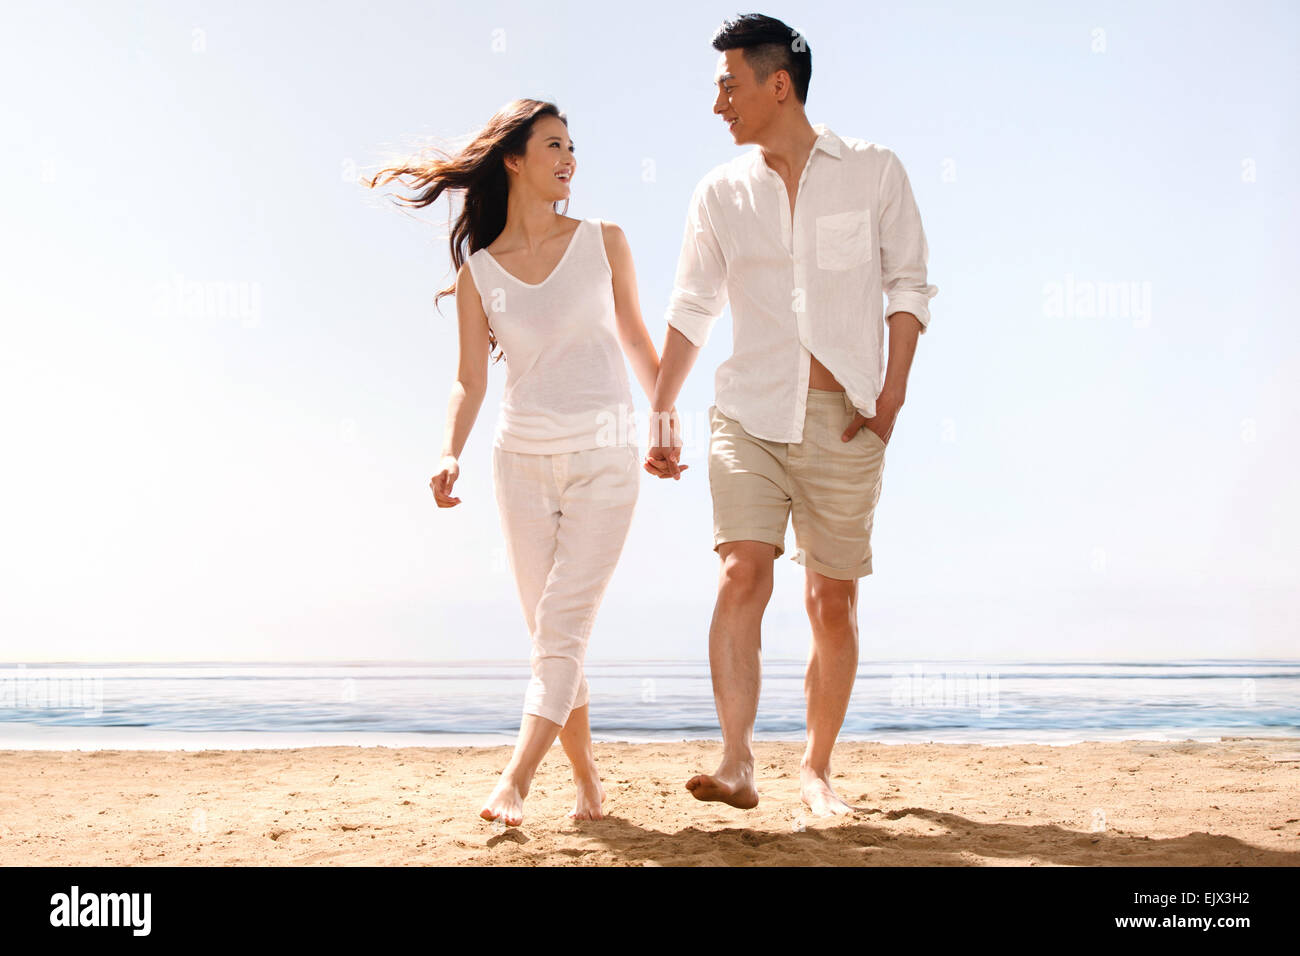 The romantic young lovers holding hands walking in the sea Stock Photo